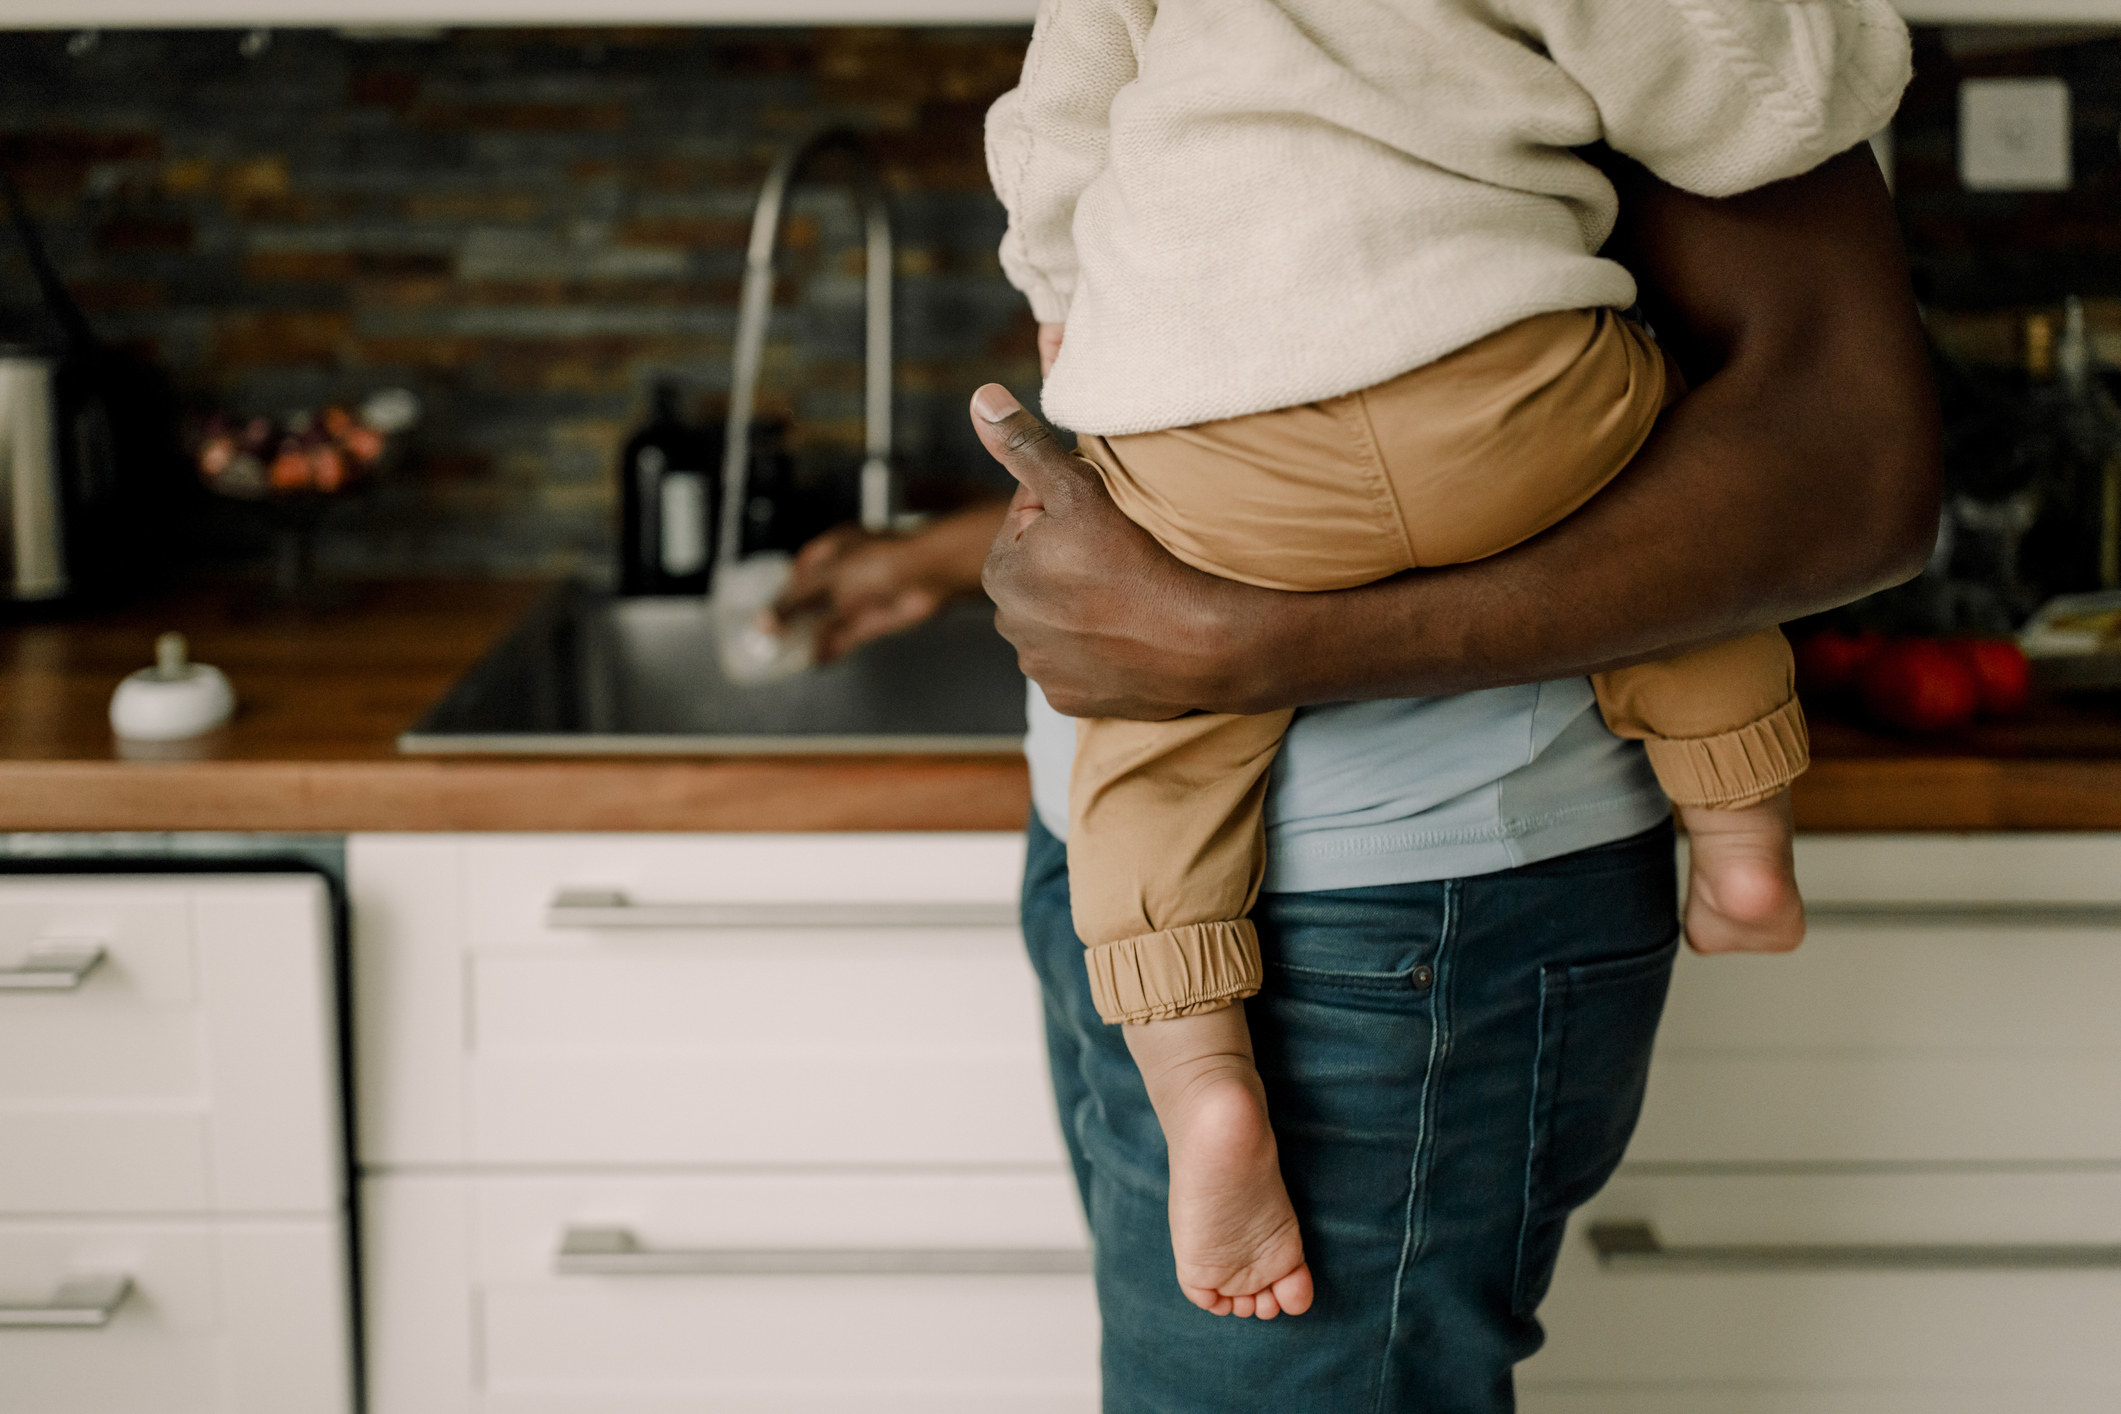 A person in a kitchen holding a baby